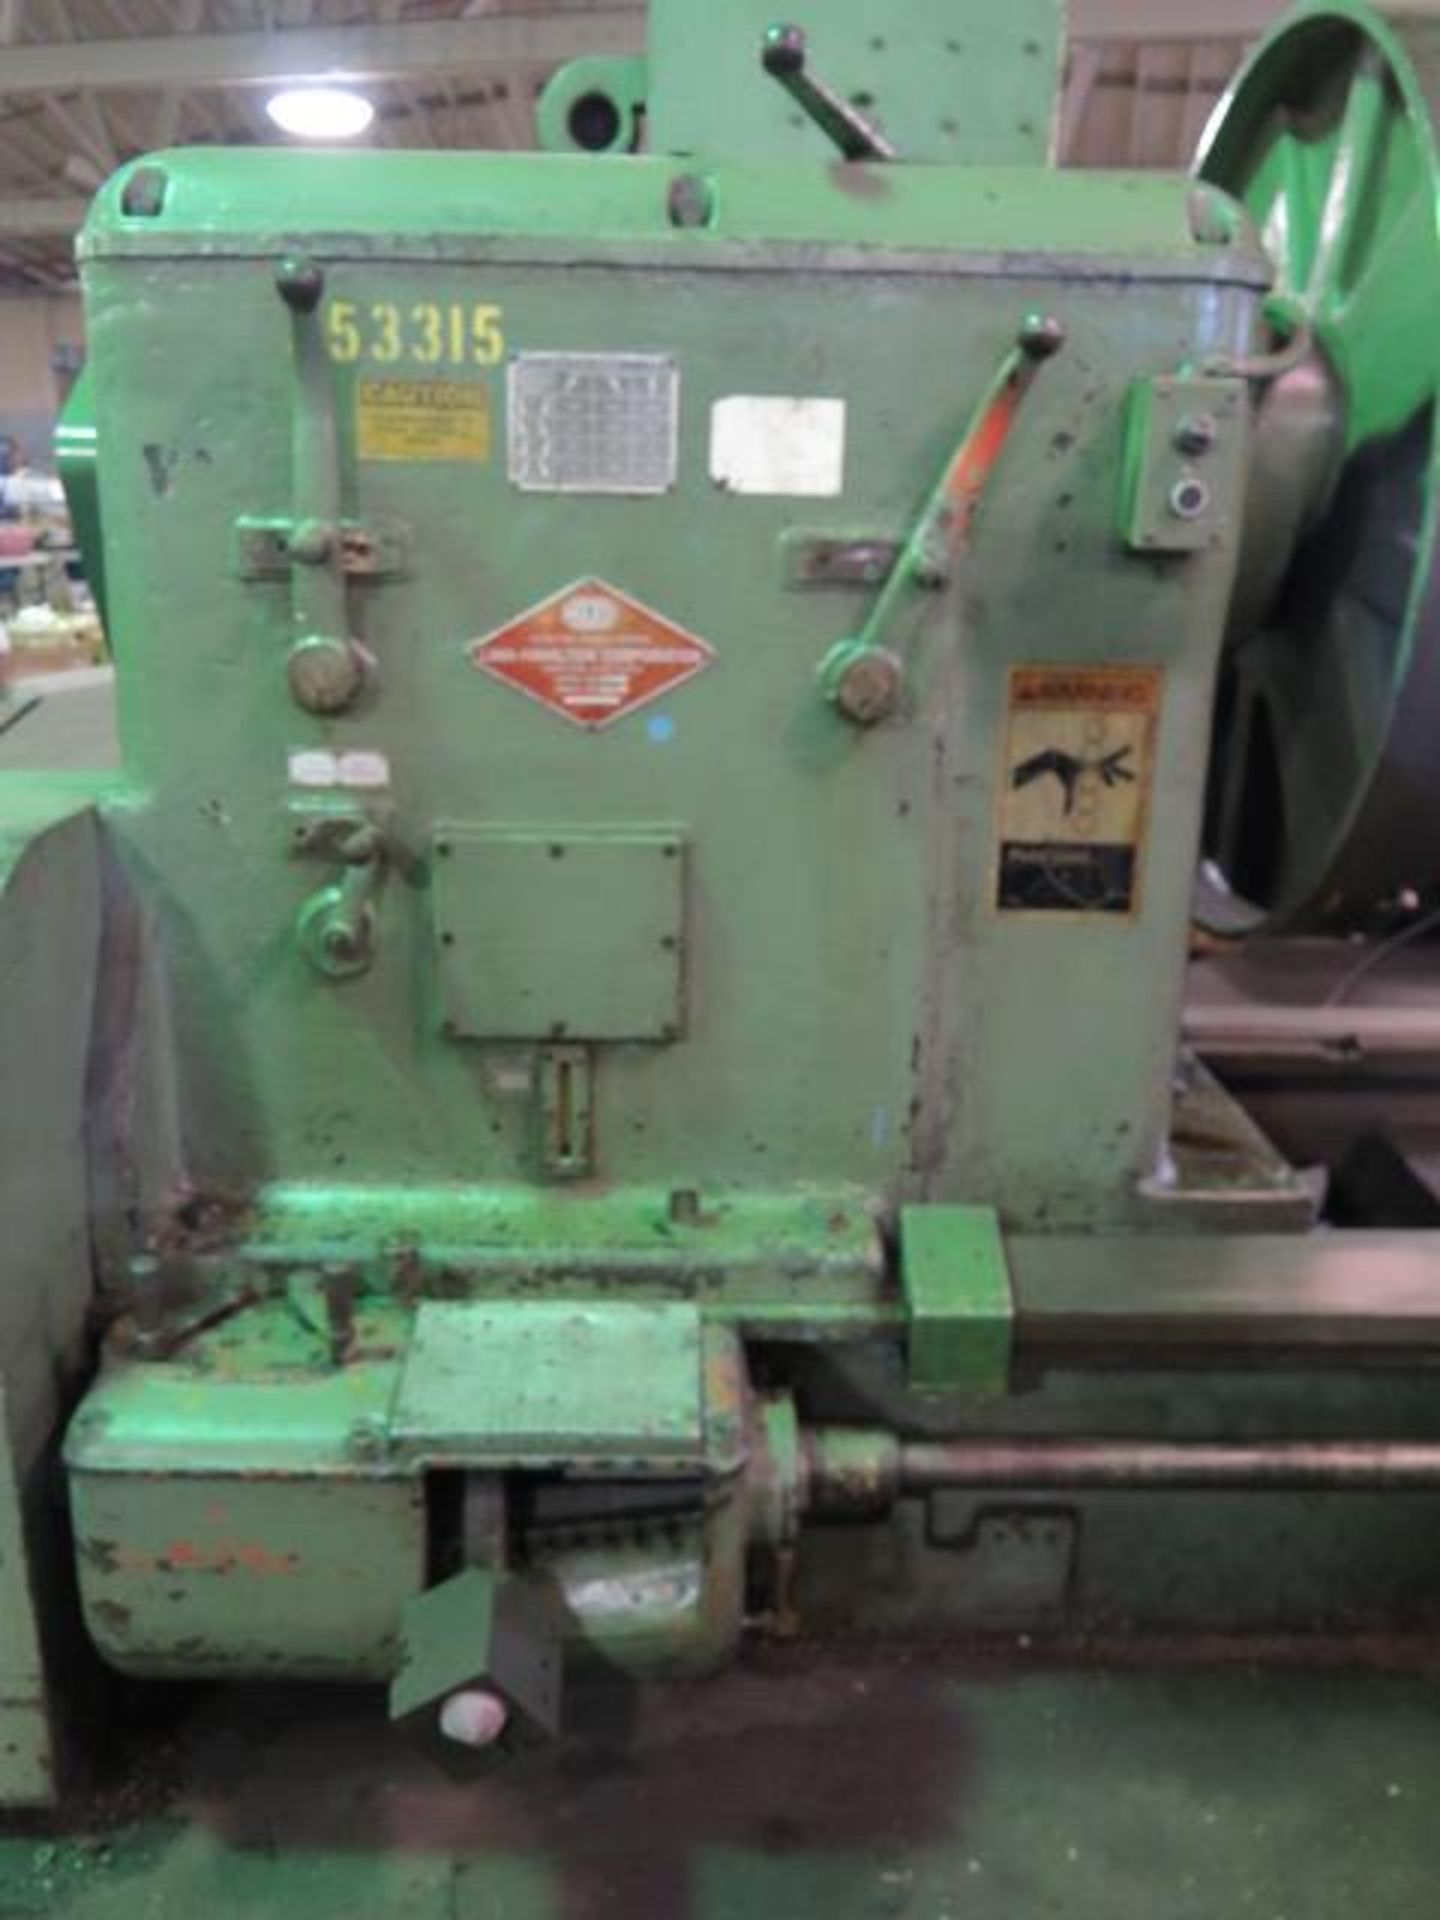 Niles A54P 62” x 140” Lathe s/n 23579 w/ 3.94-232 RPM, Inch Threading, Steady Rest, SOLD AS IS - Image 6 of 20